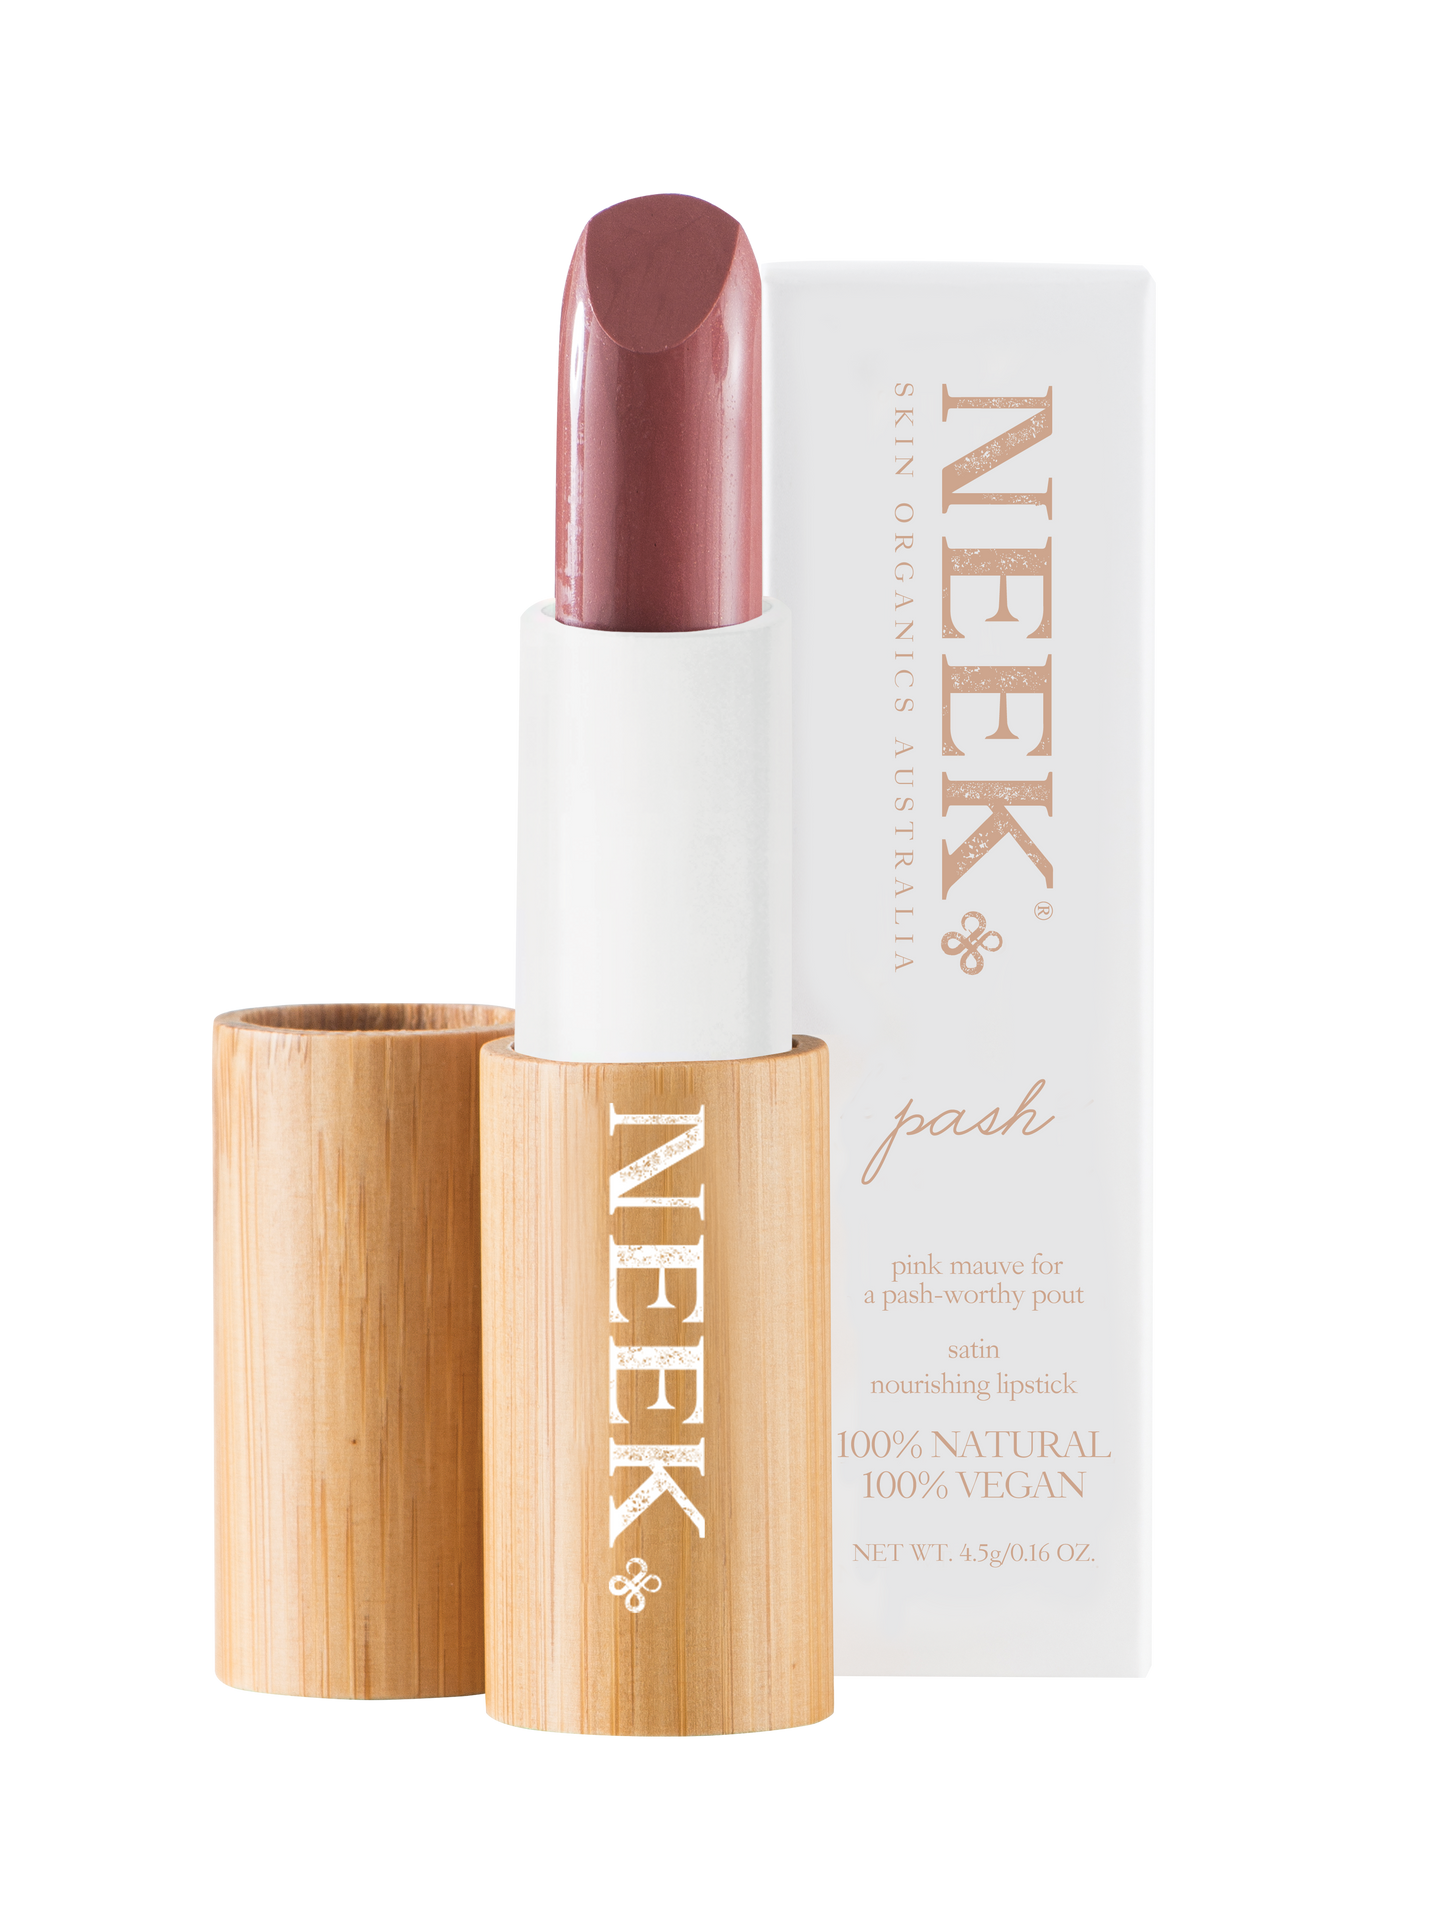 Image of Neek Lipstick Pash winner of the Clean Beauty Award and Non toxic Award